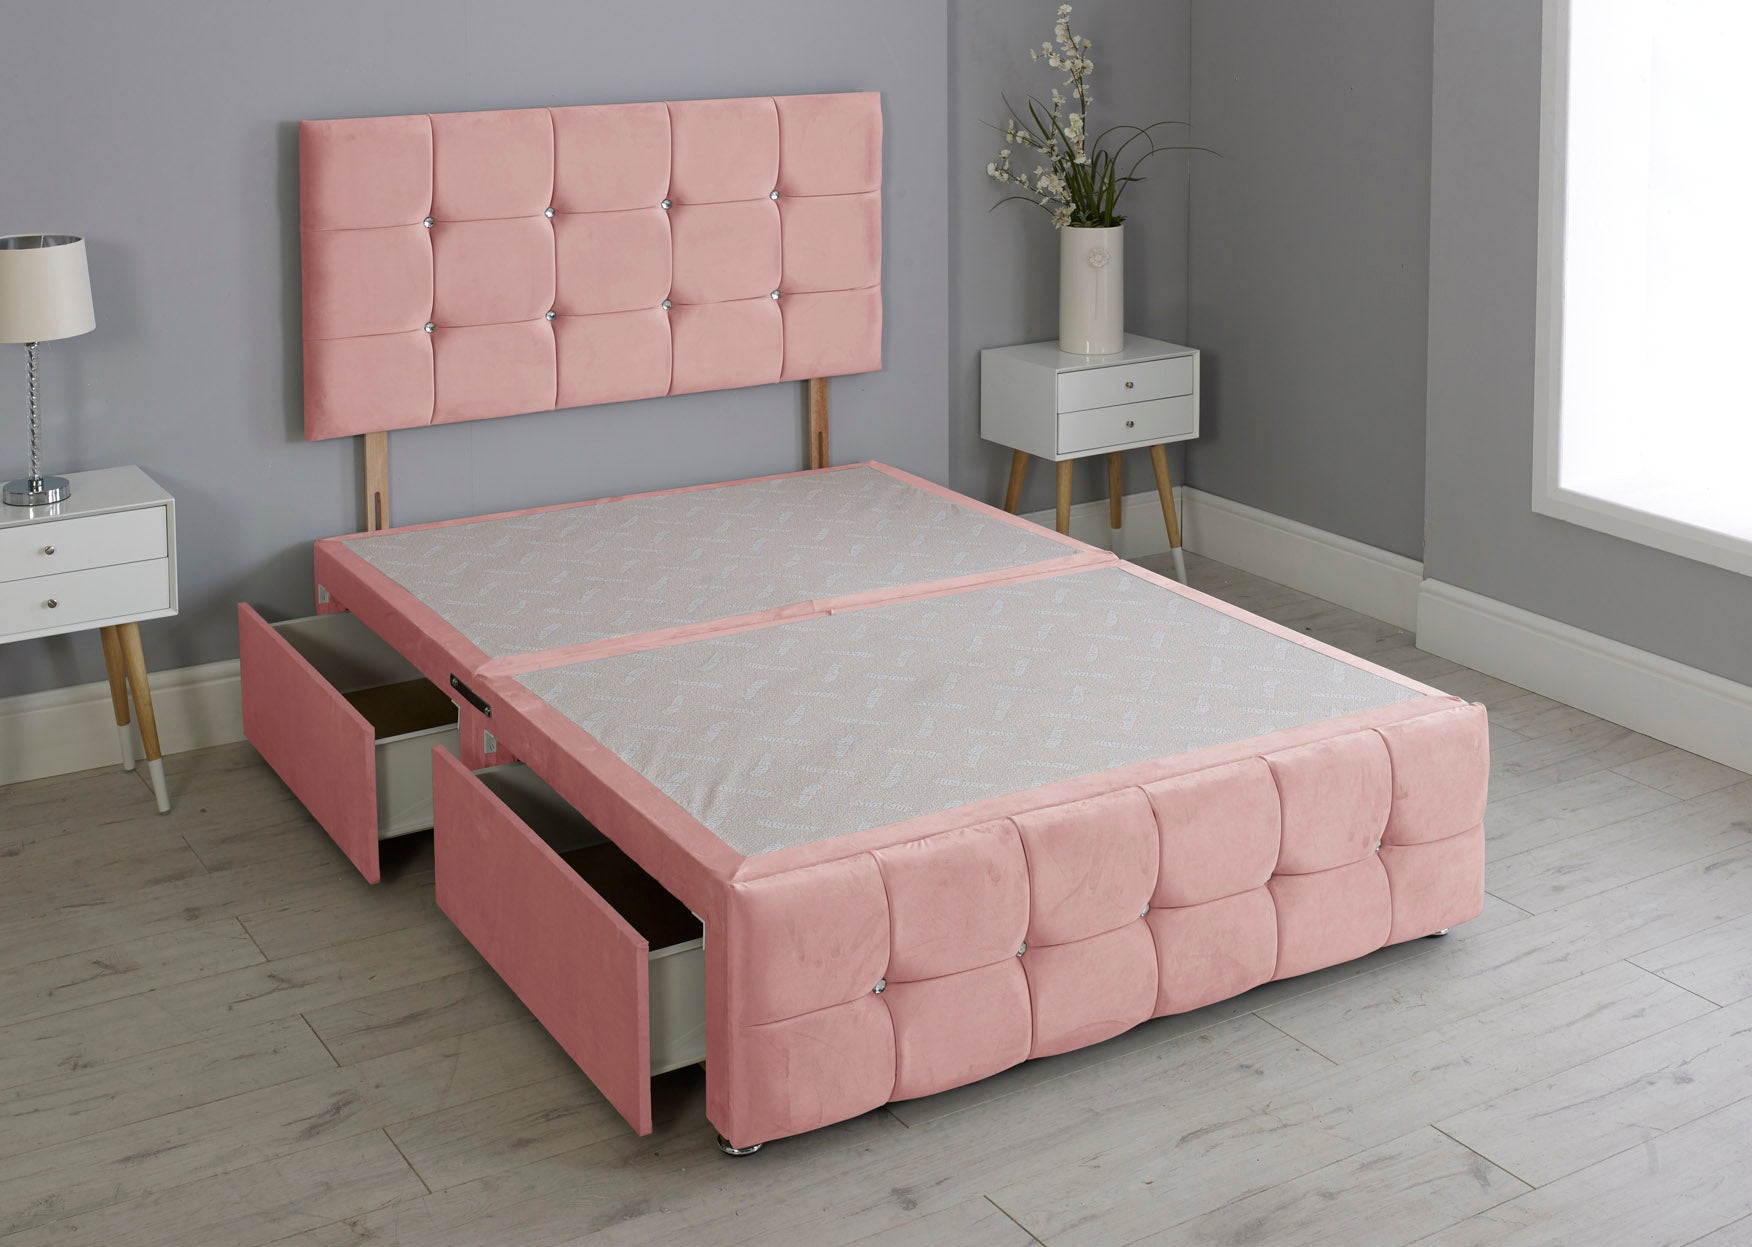 Cuboid Cube Divan Bed Base With Headboard And Footboard